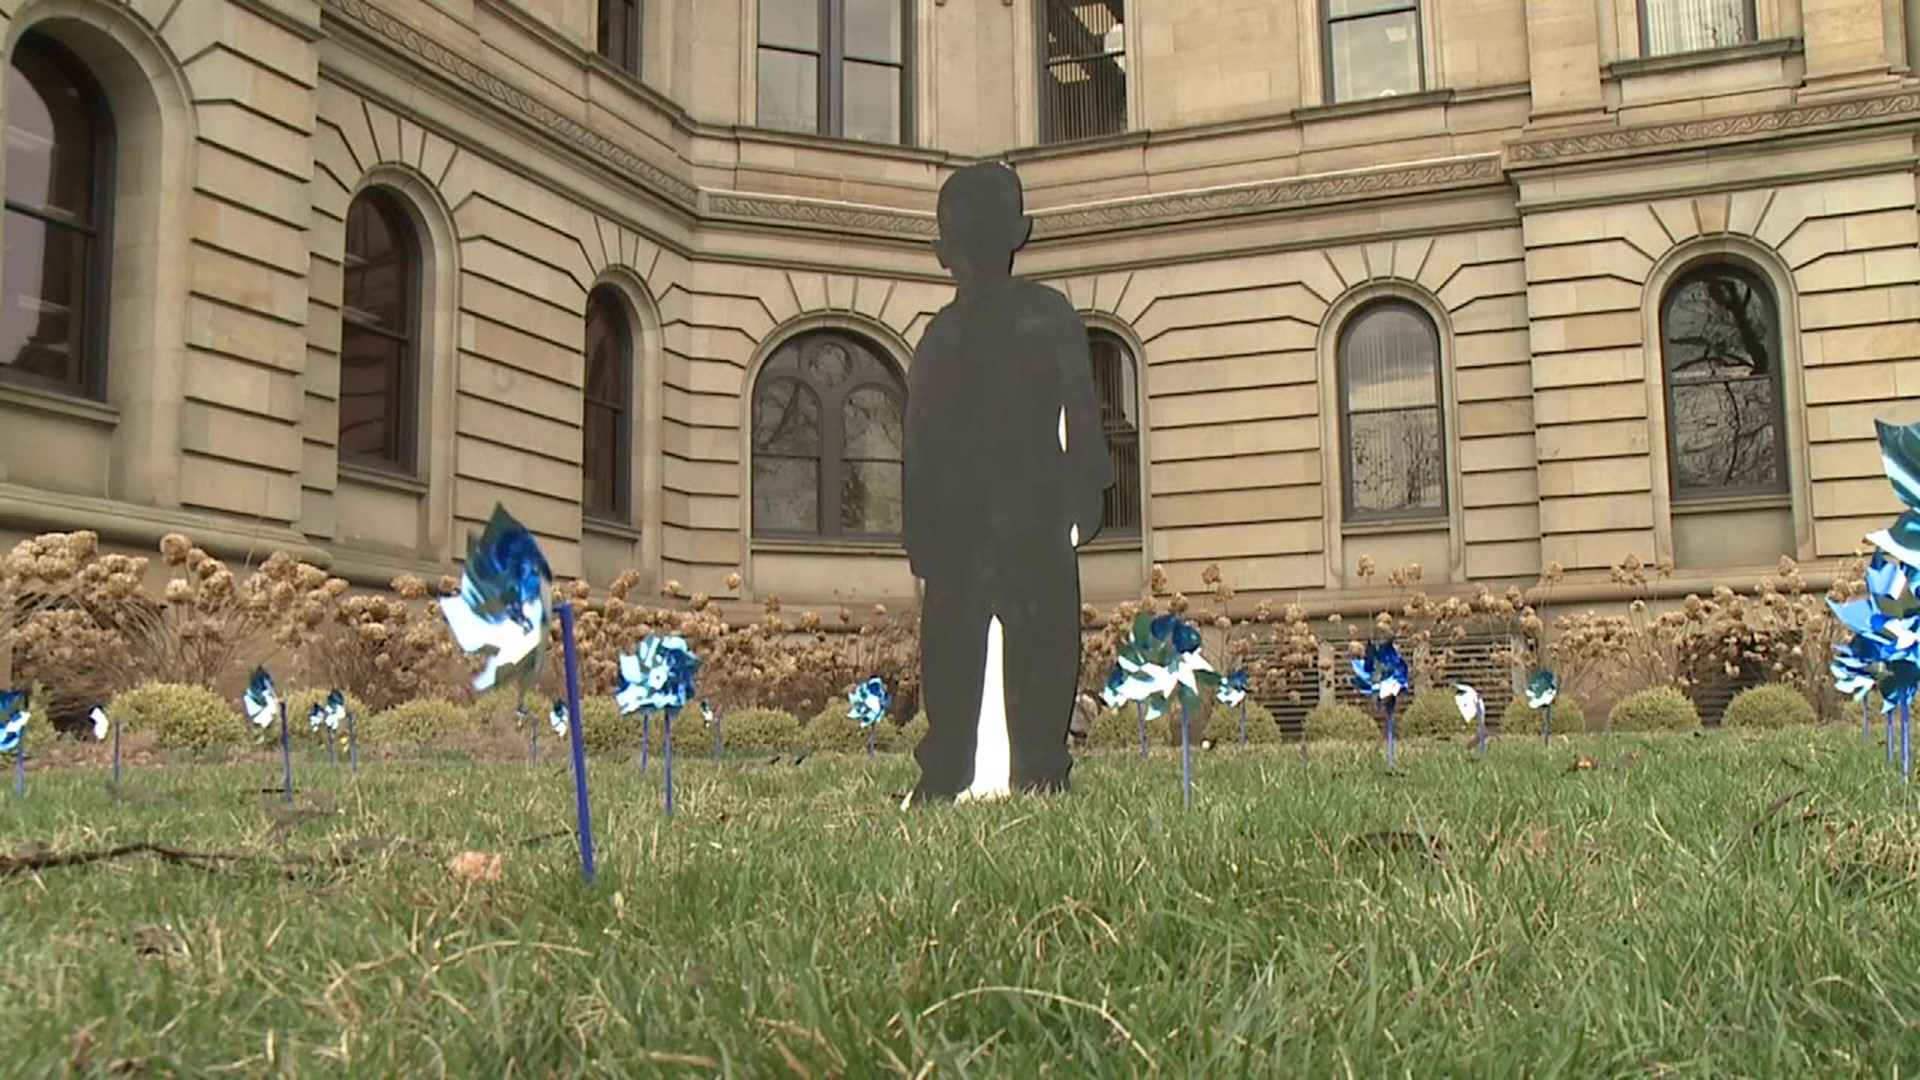 The pinwheel display is an annual sight at the courthouse in Wilkes-Barre, but this year the numbers represent an alarming number of child abuse reports.